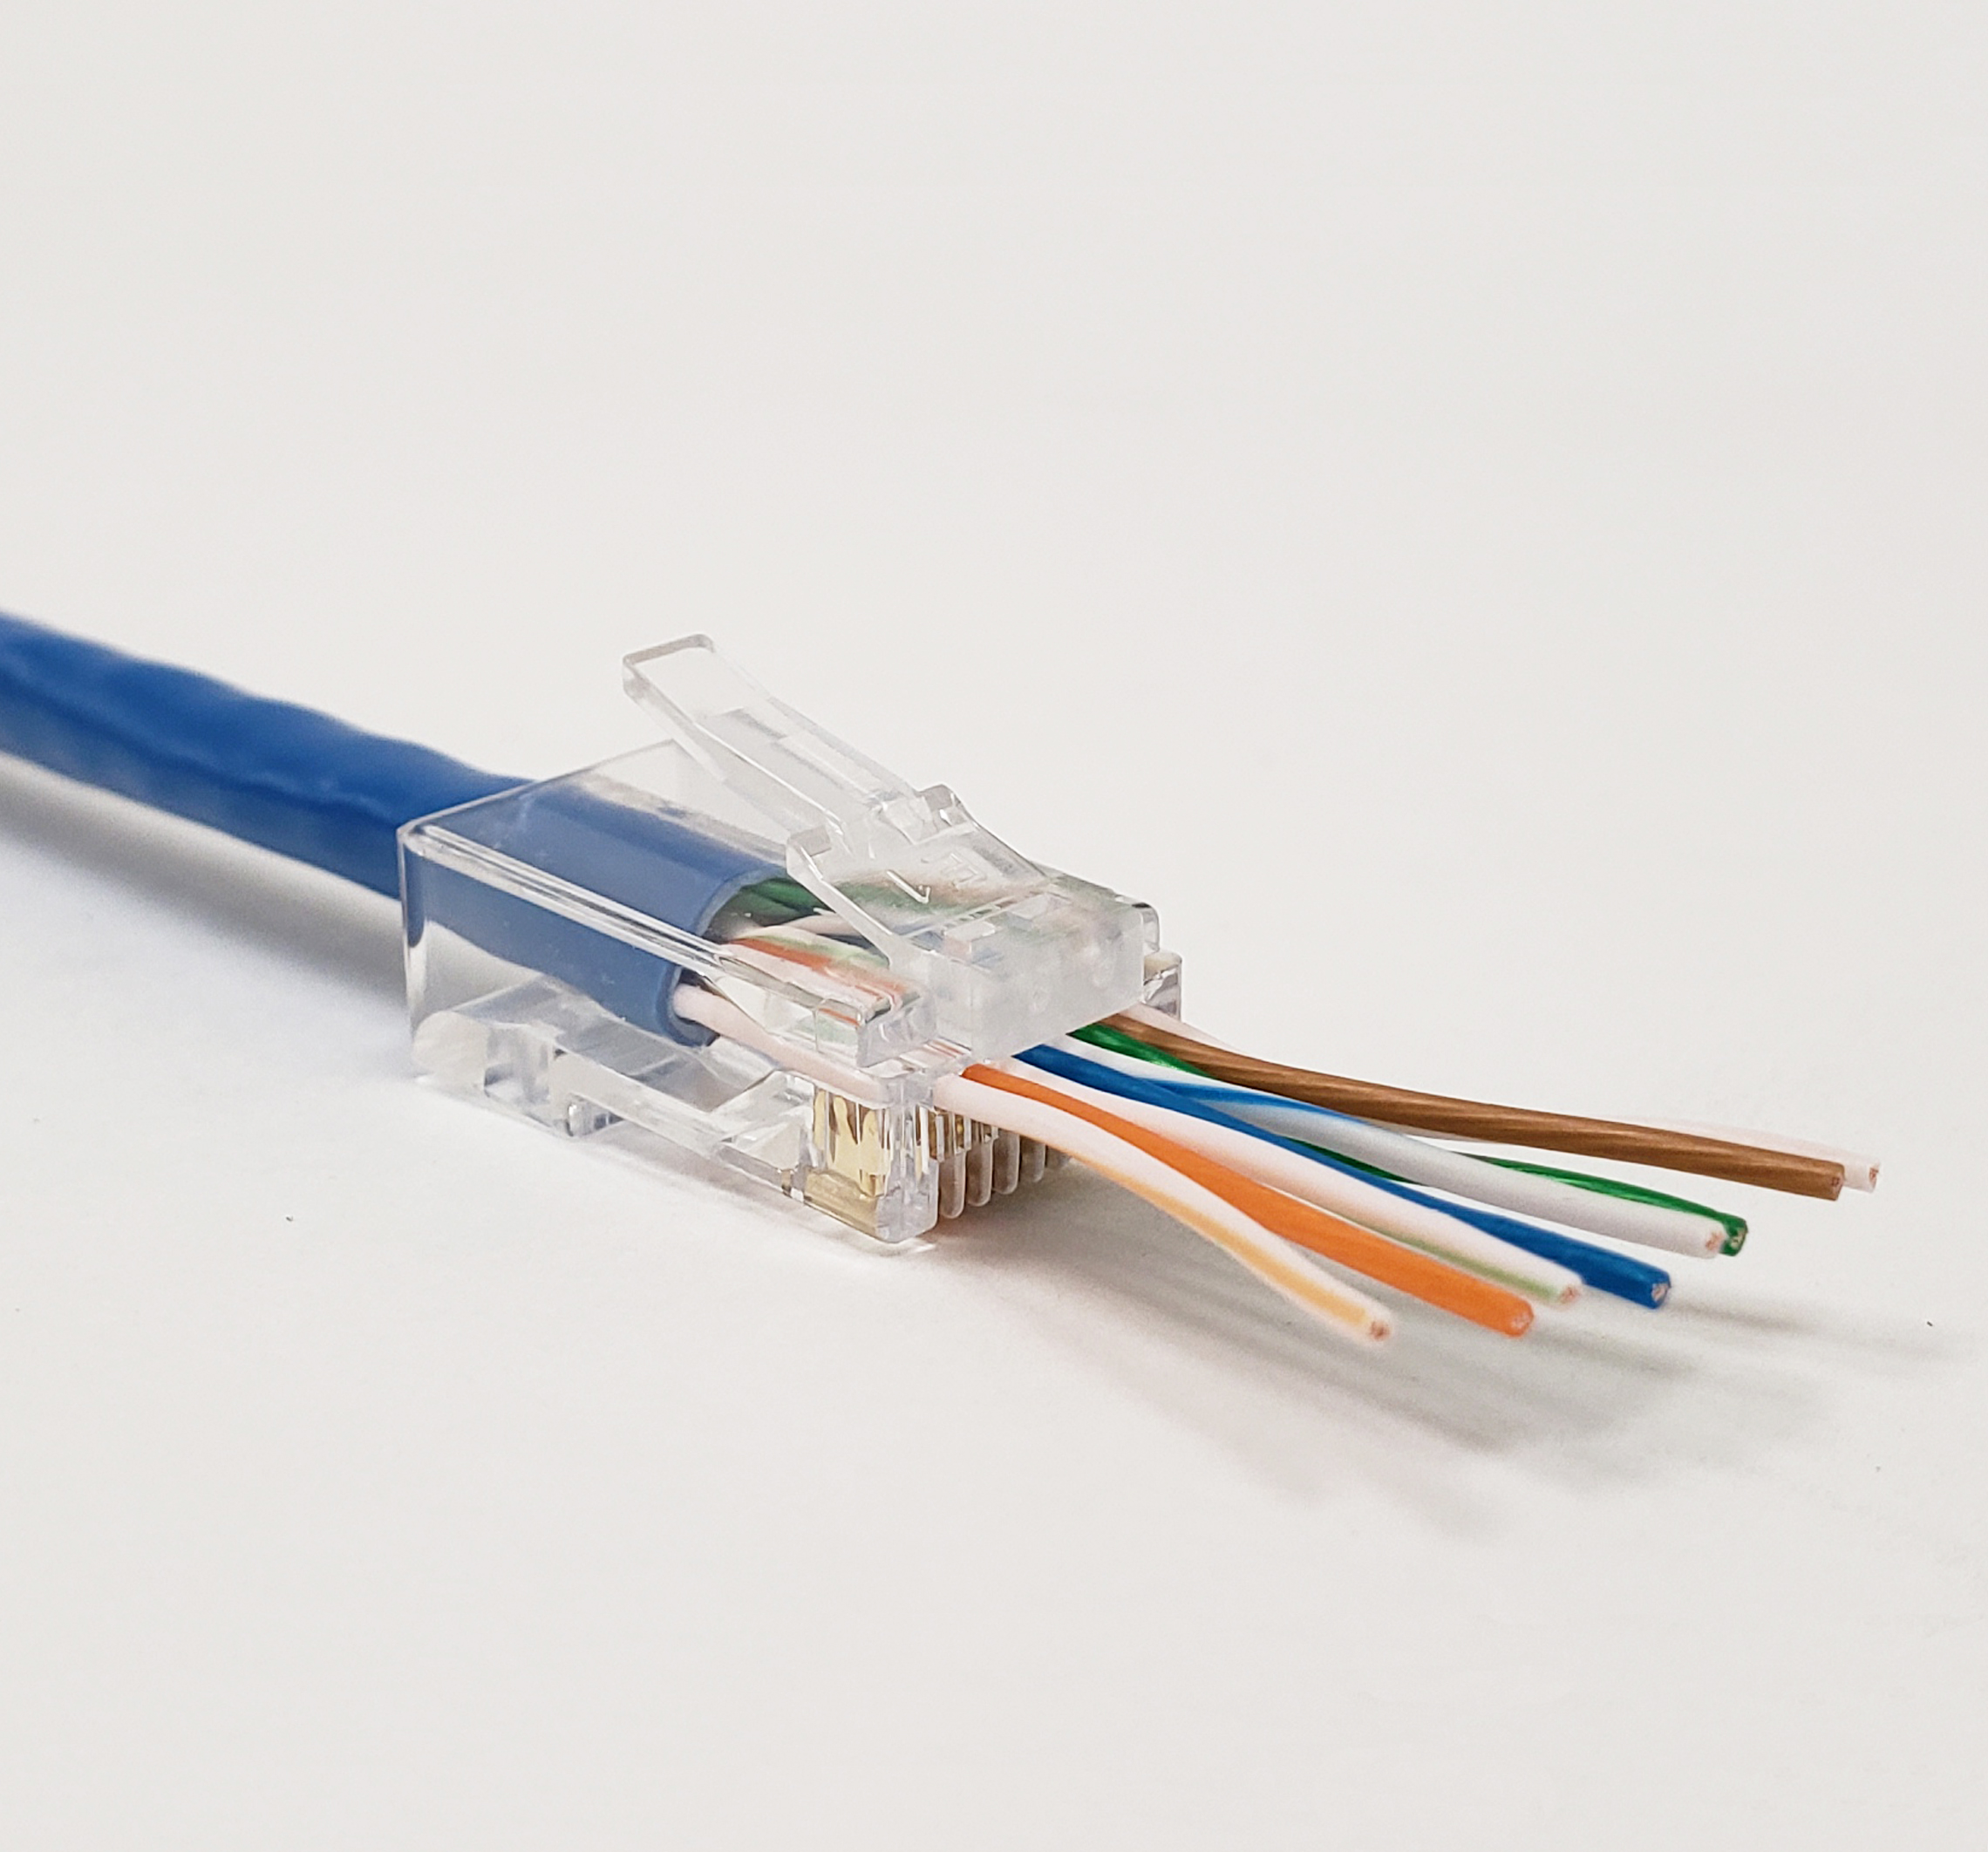 RJ45 CAT5E PASS-THROUGH SOLID OR STRANDED CONNECTORS (50/BAG)